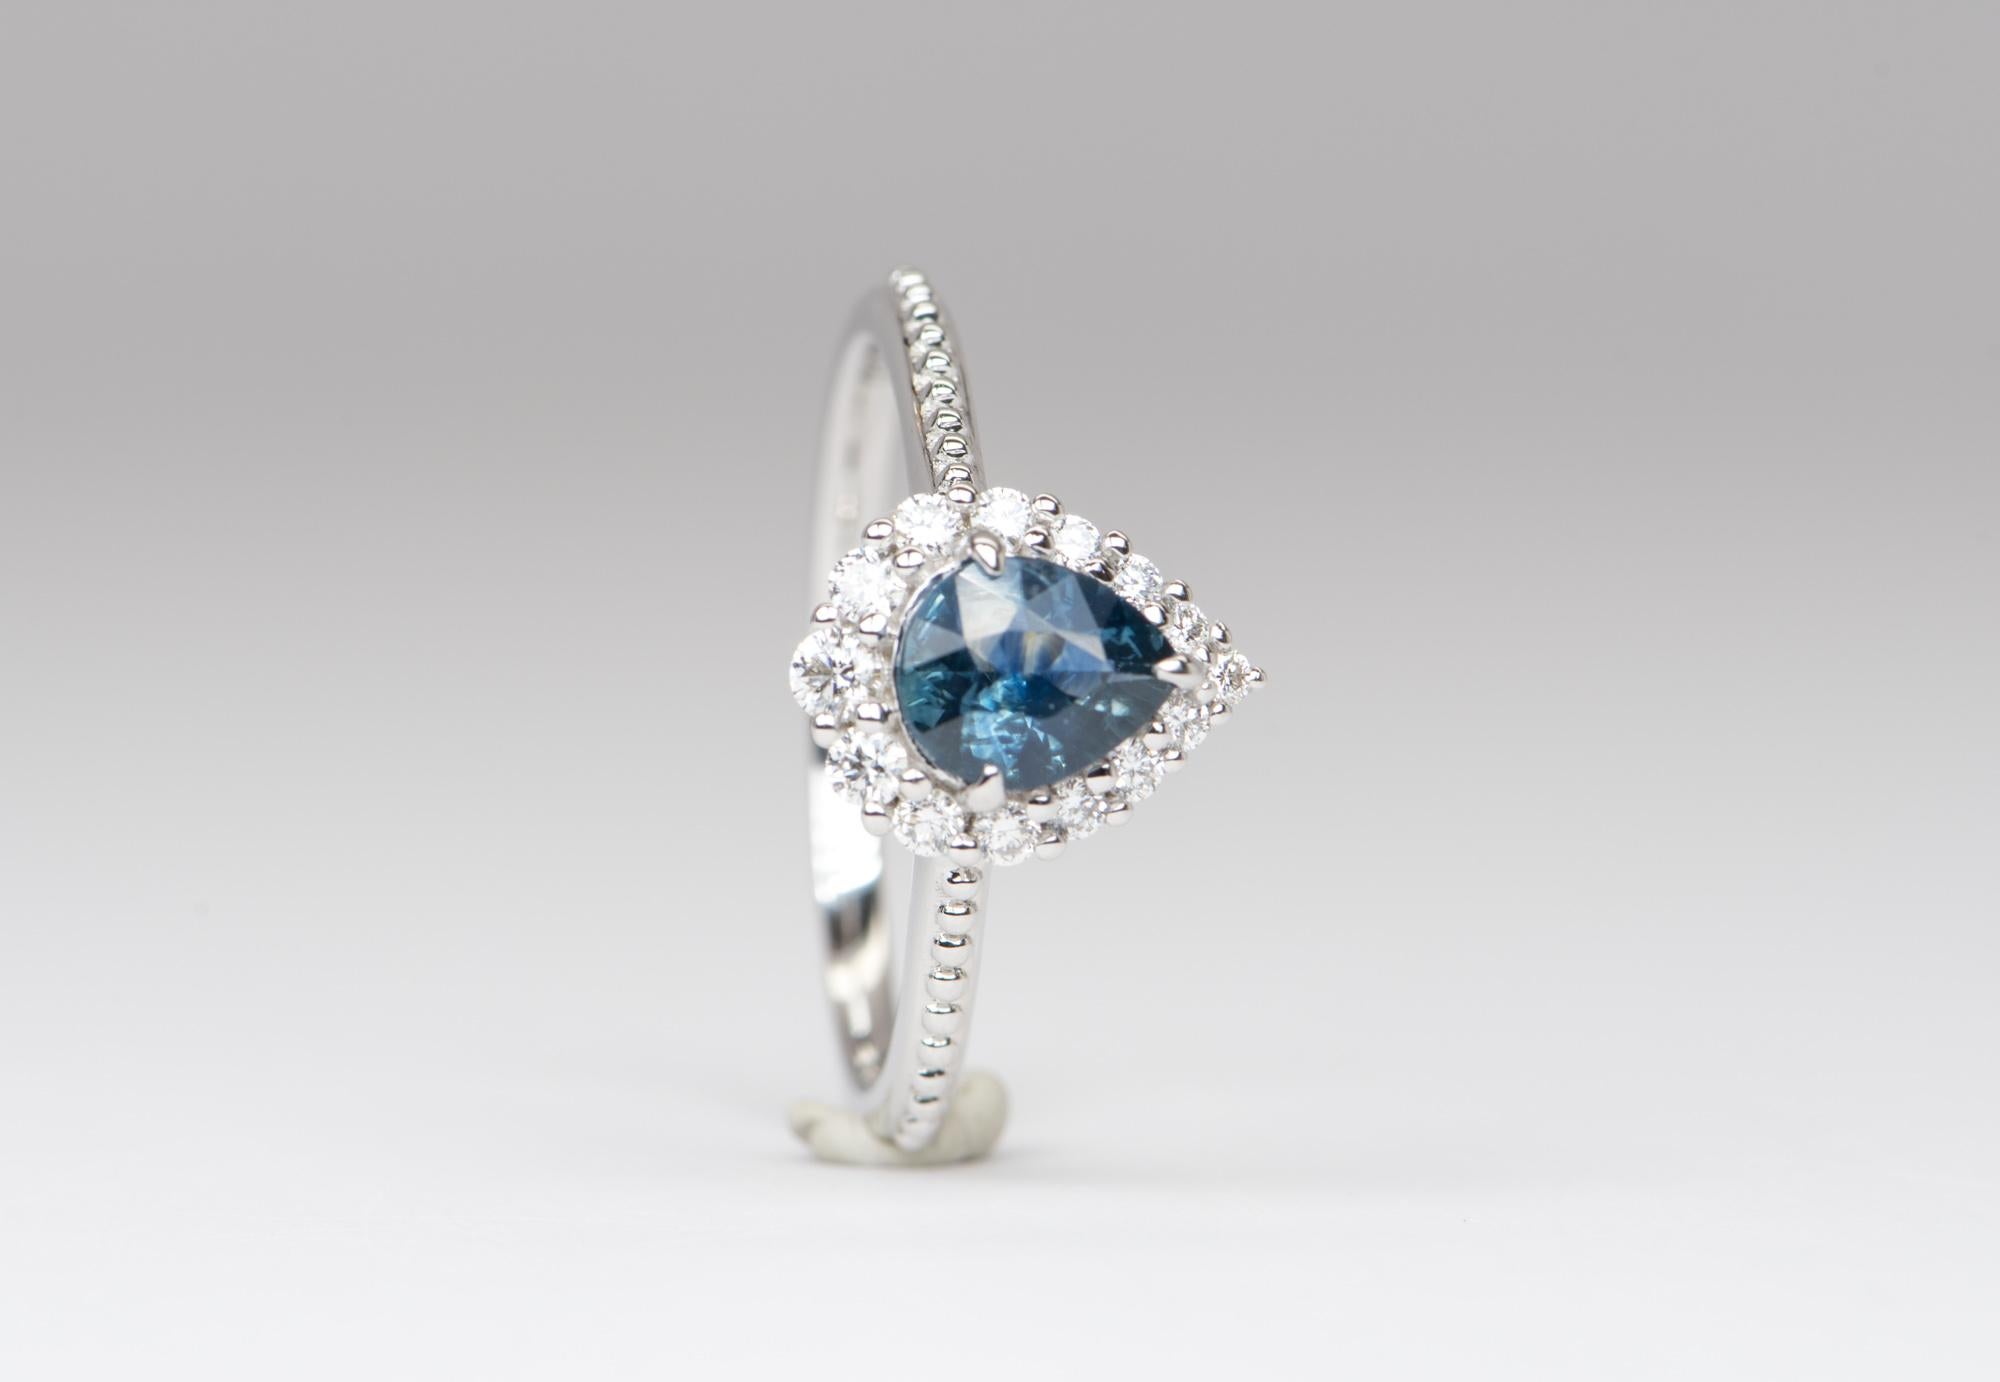 Pear Cut Teal Blue Montana Sapphire with Diamond Halo 14K White Gold Engagement Ring